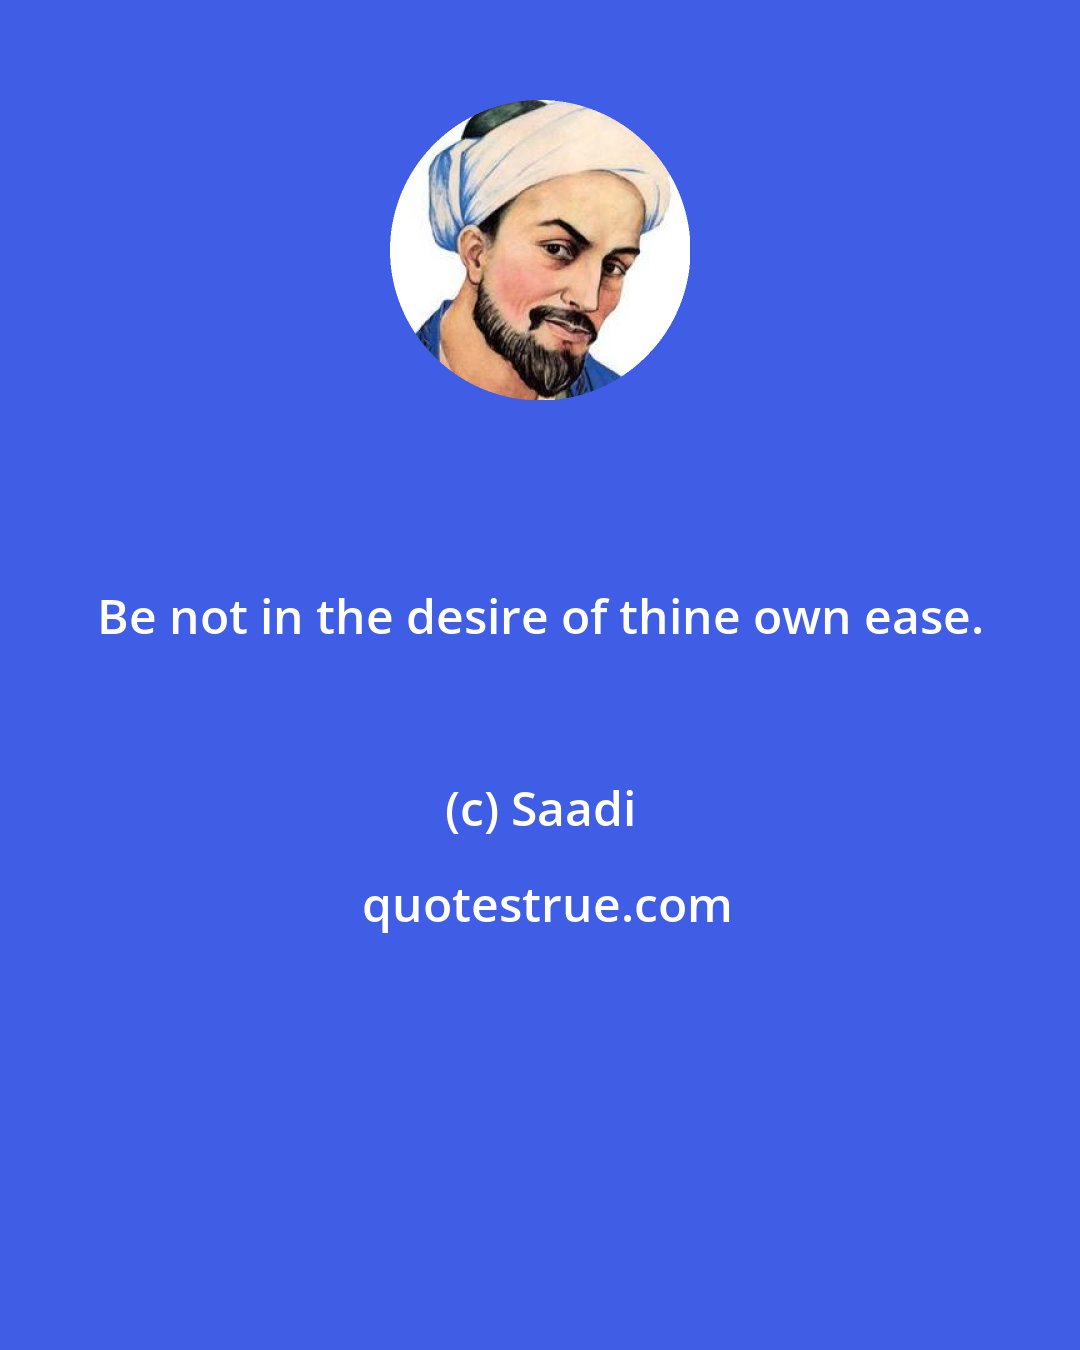 Saadi: Be not in the desire of thine own ease.